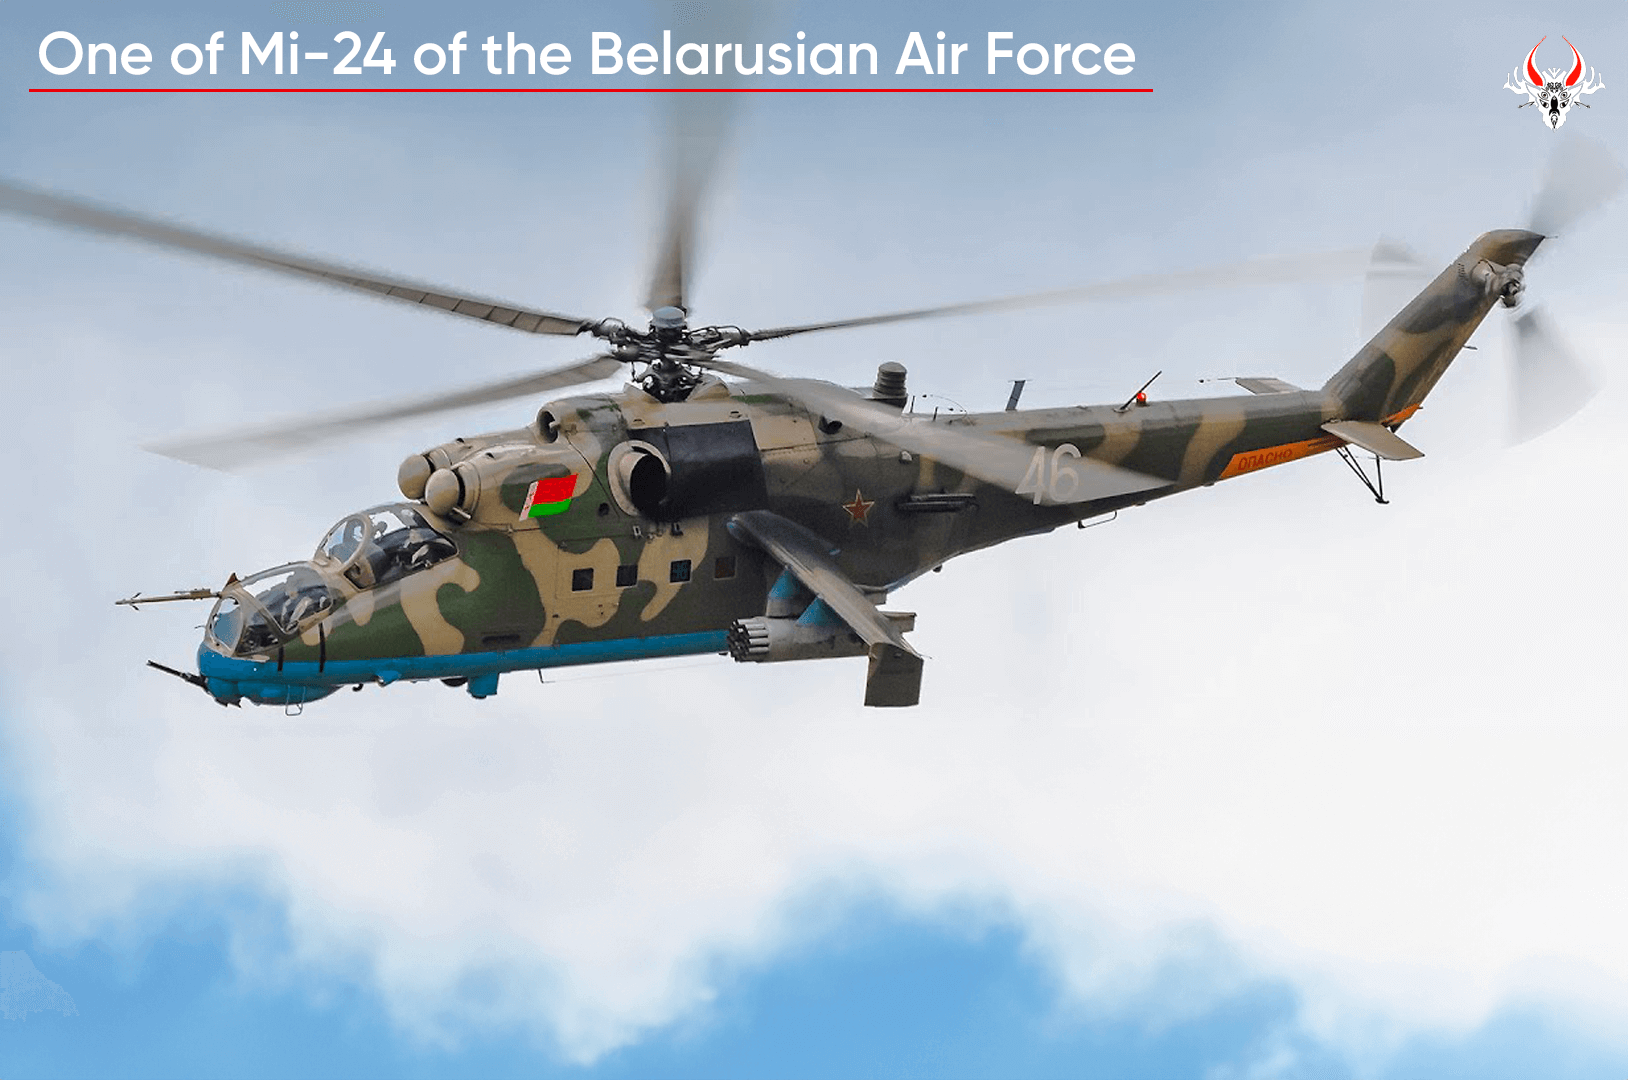 One of Mi-24 helicopters of the Belarusian Air Force